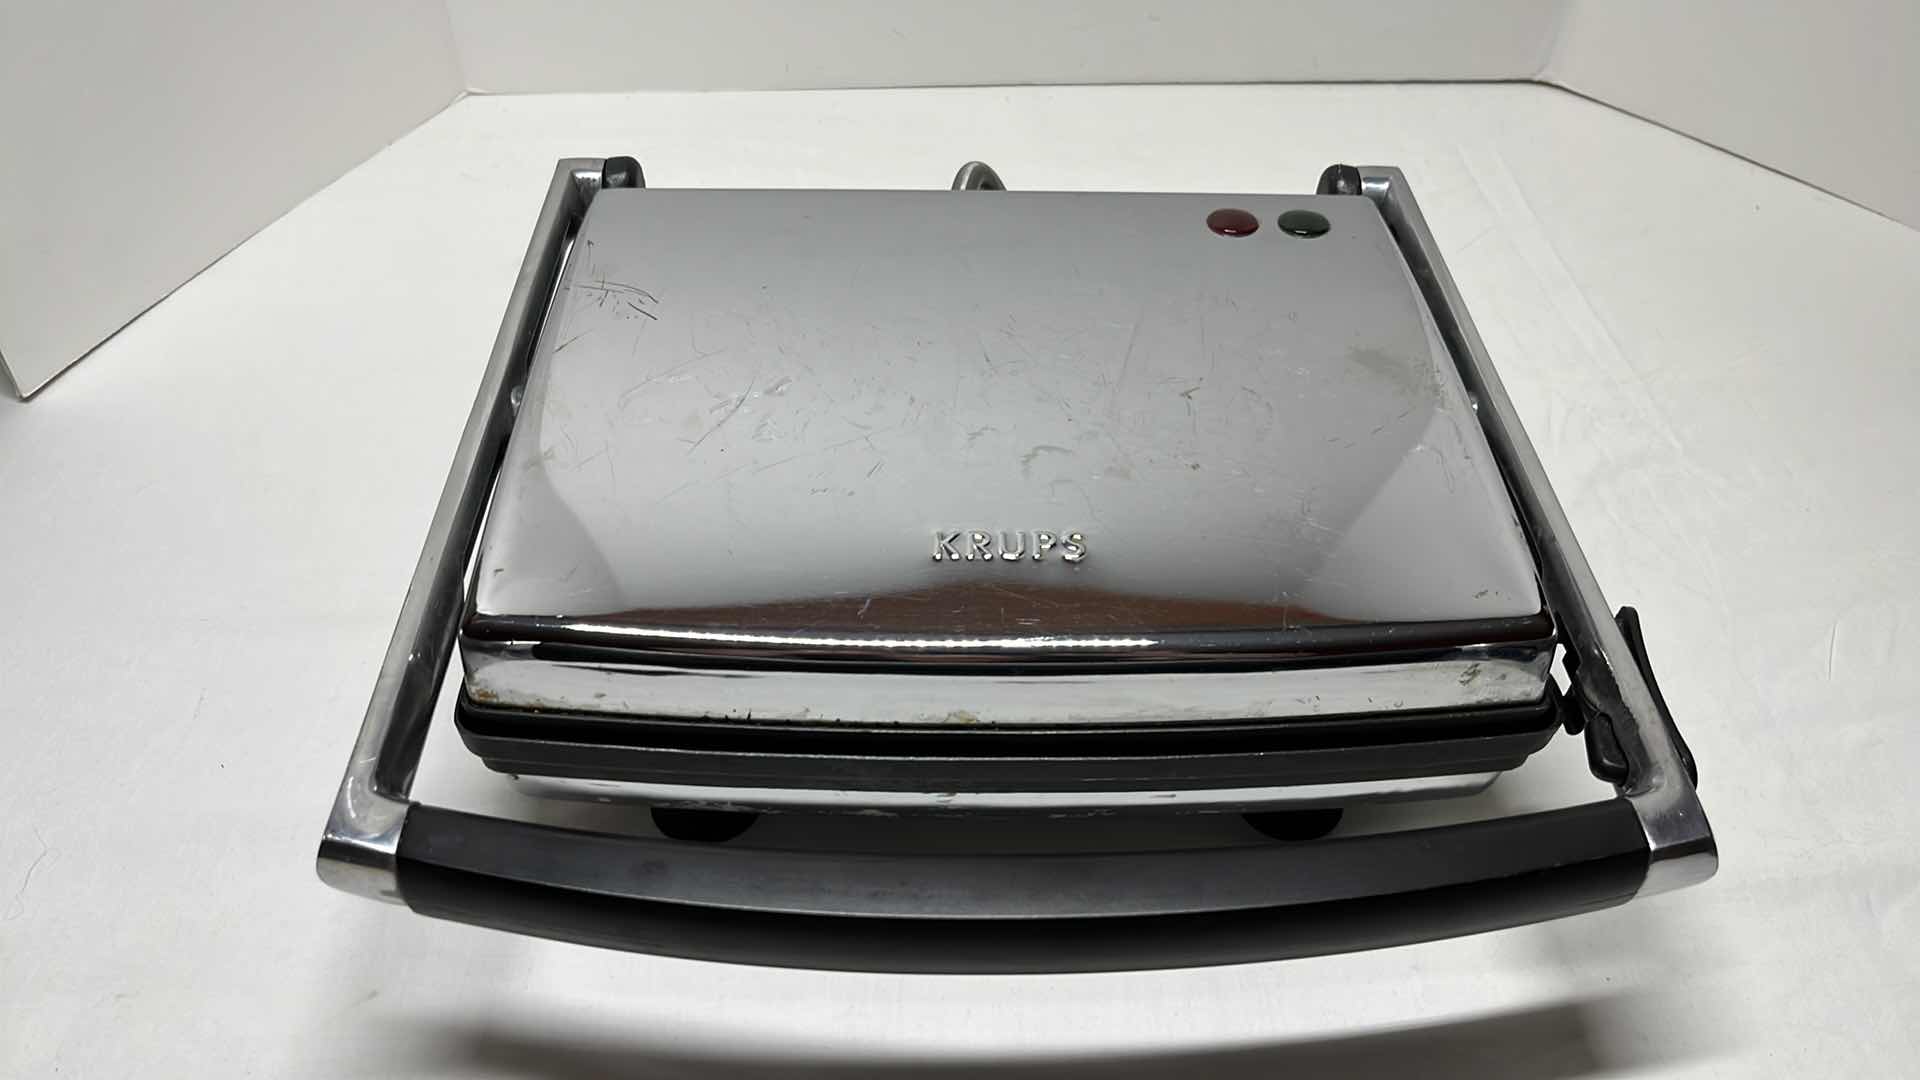 Photo 1 of KRUPS ELECTRIC STAINLESS STEEL NON-STICK UNIVERSAL GRILL/SANDWICH PANINI MAKER (MODEL FDE3)